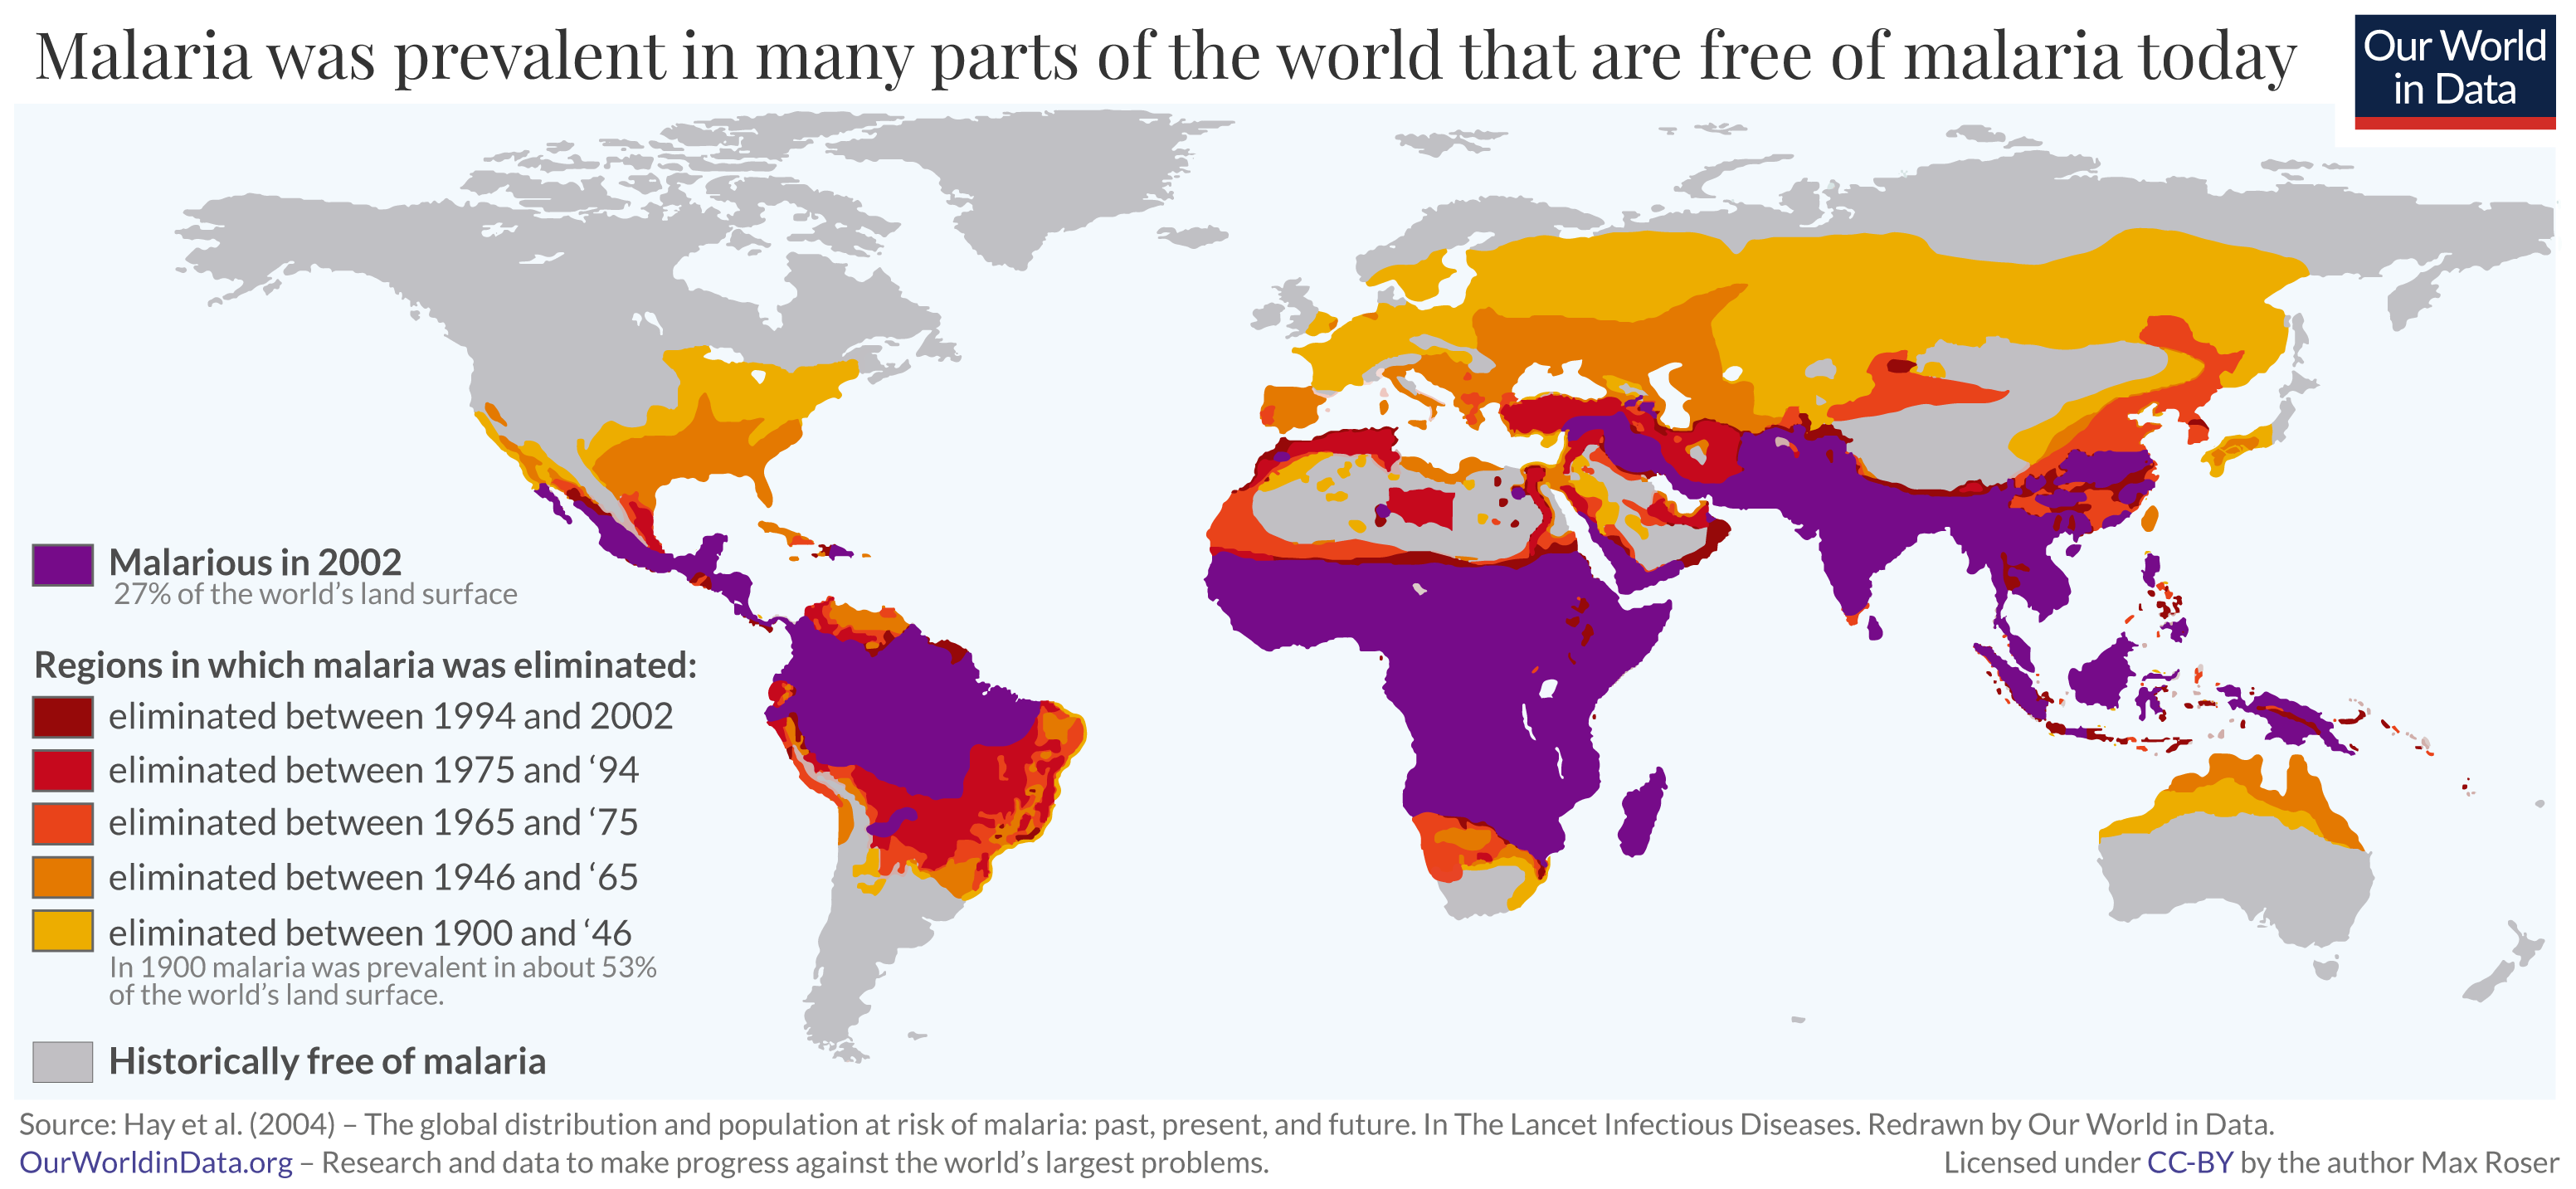 Previous-prevalence-of-malaria-world-map.png